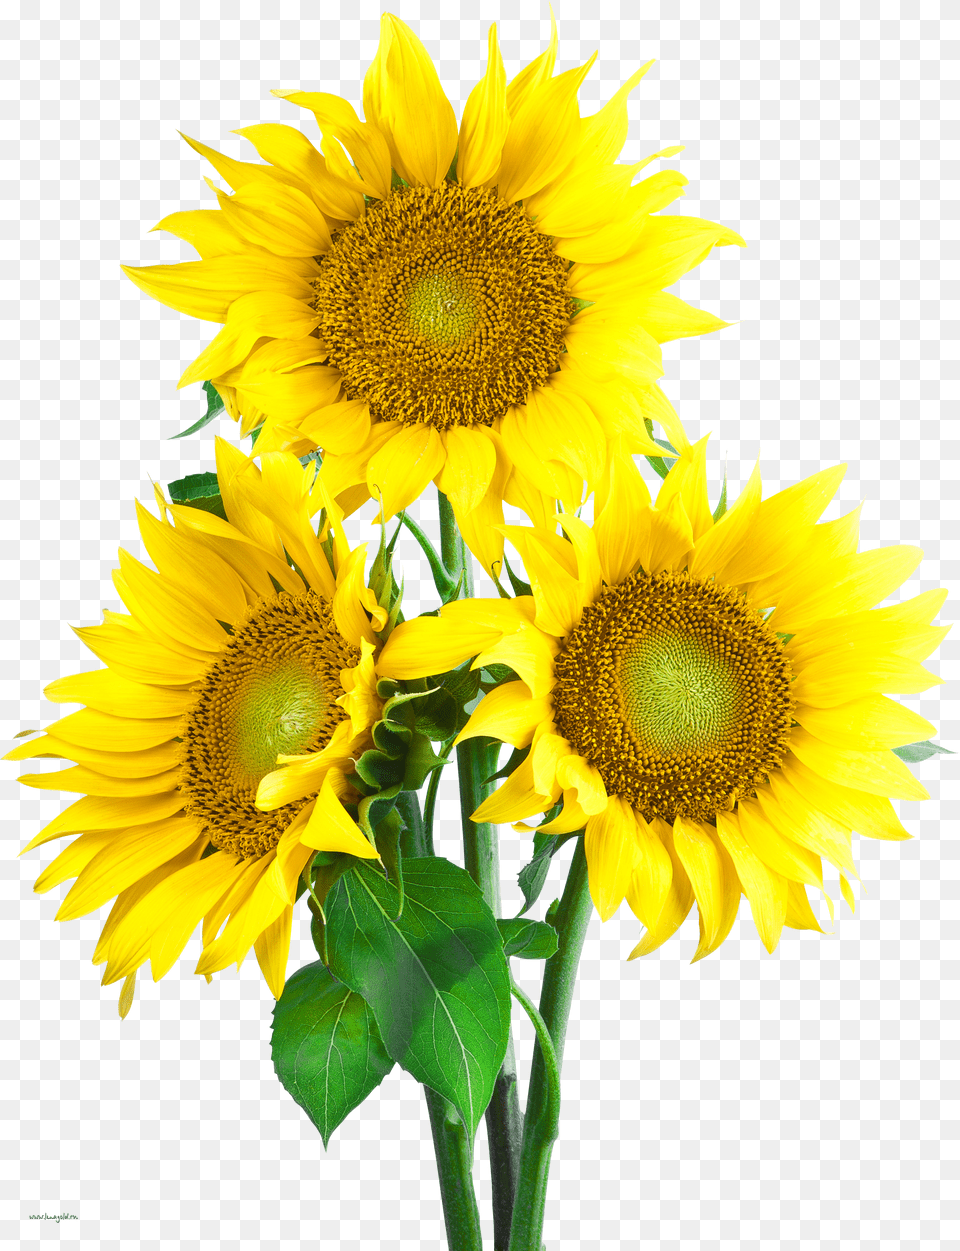 Sunflower Image With Transpa Background, Gray Free Transparent Png